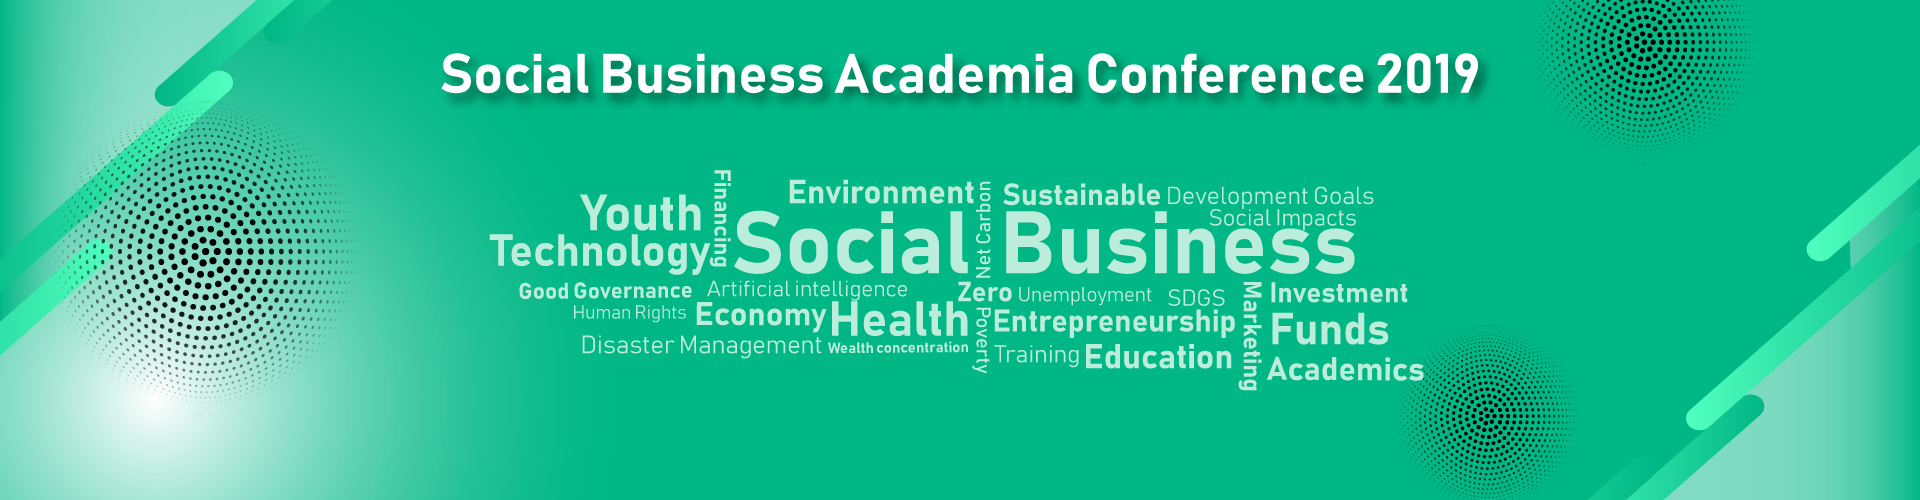 Social Business Academia Conference